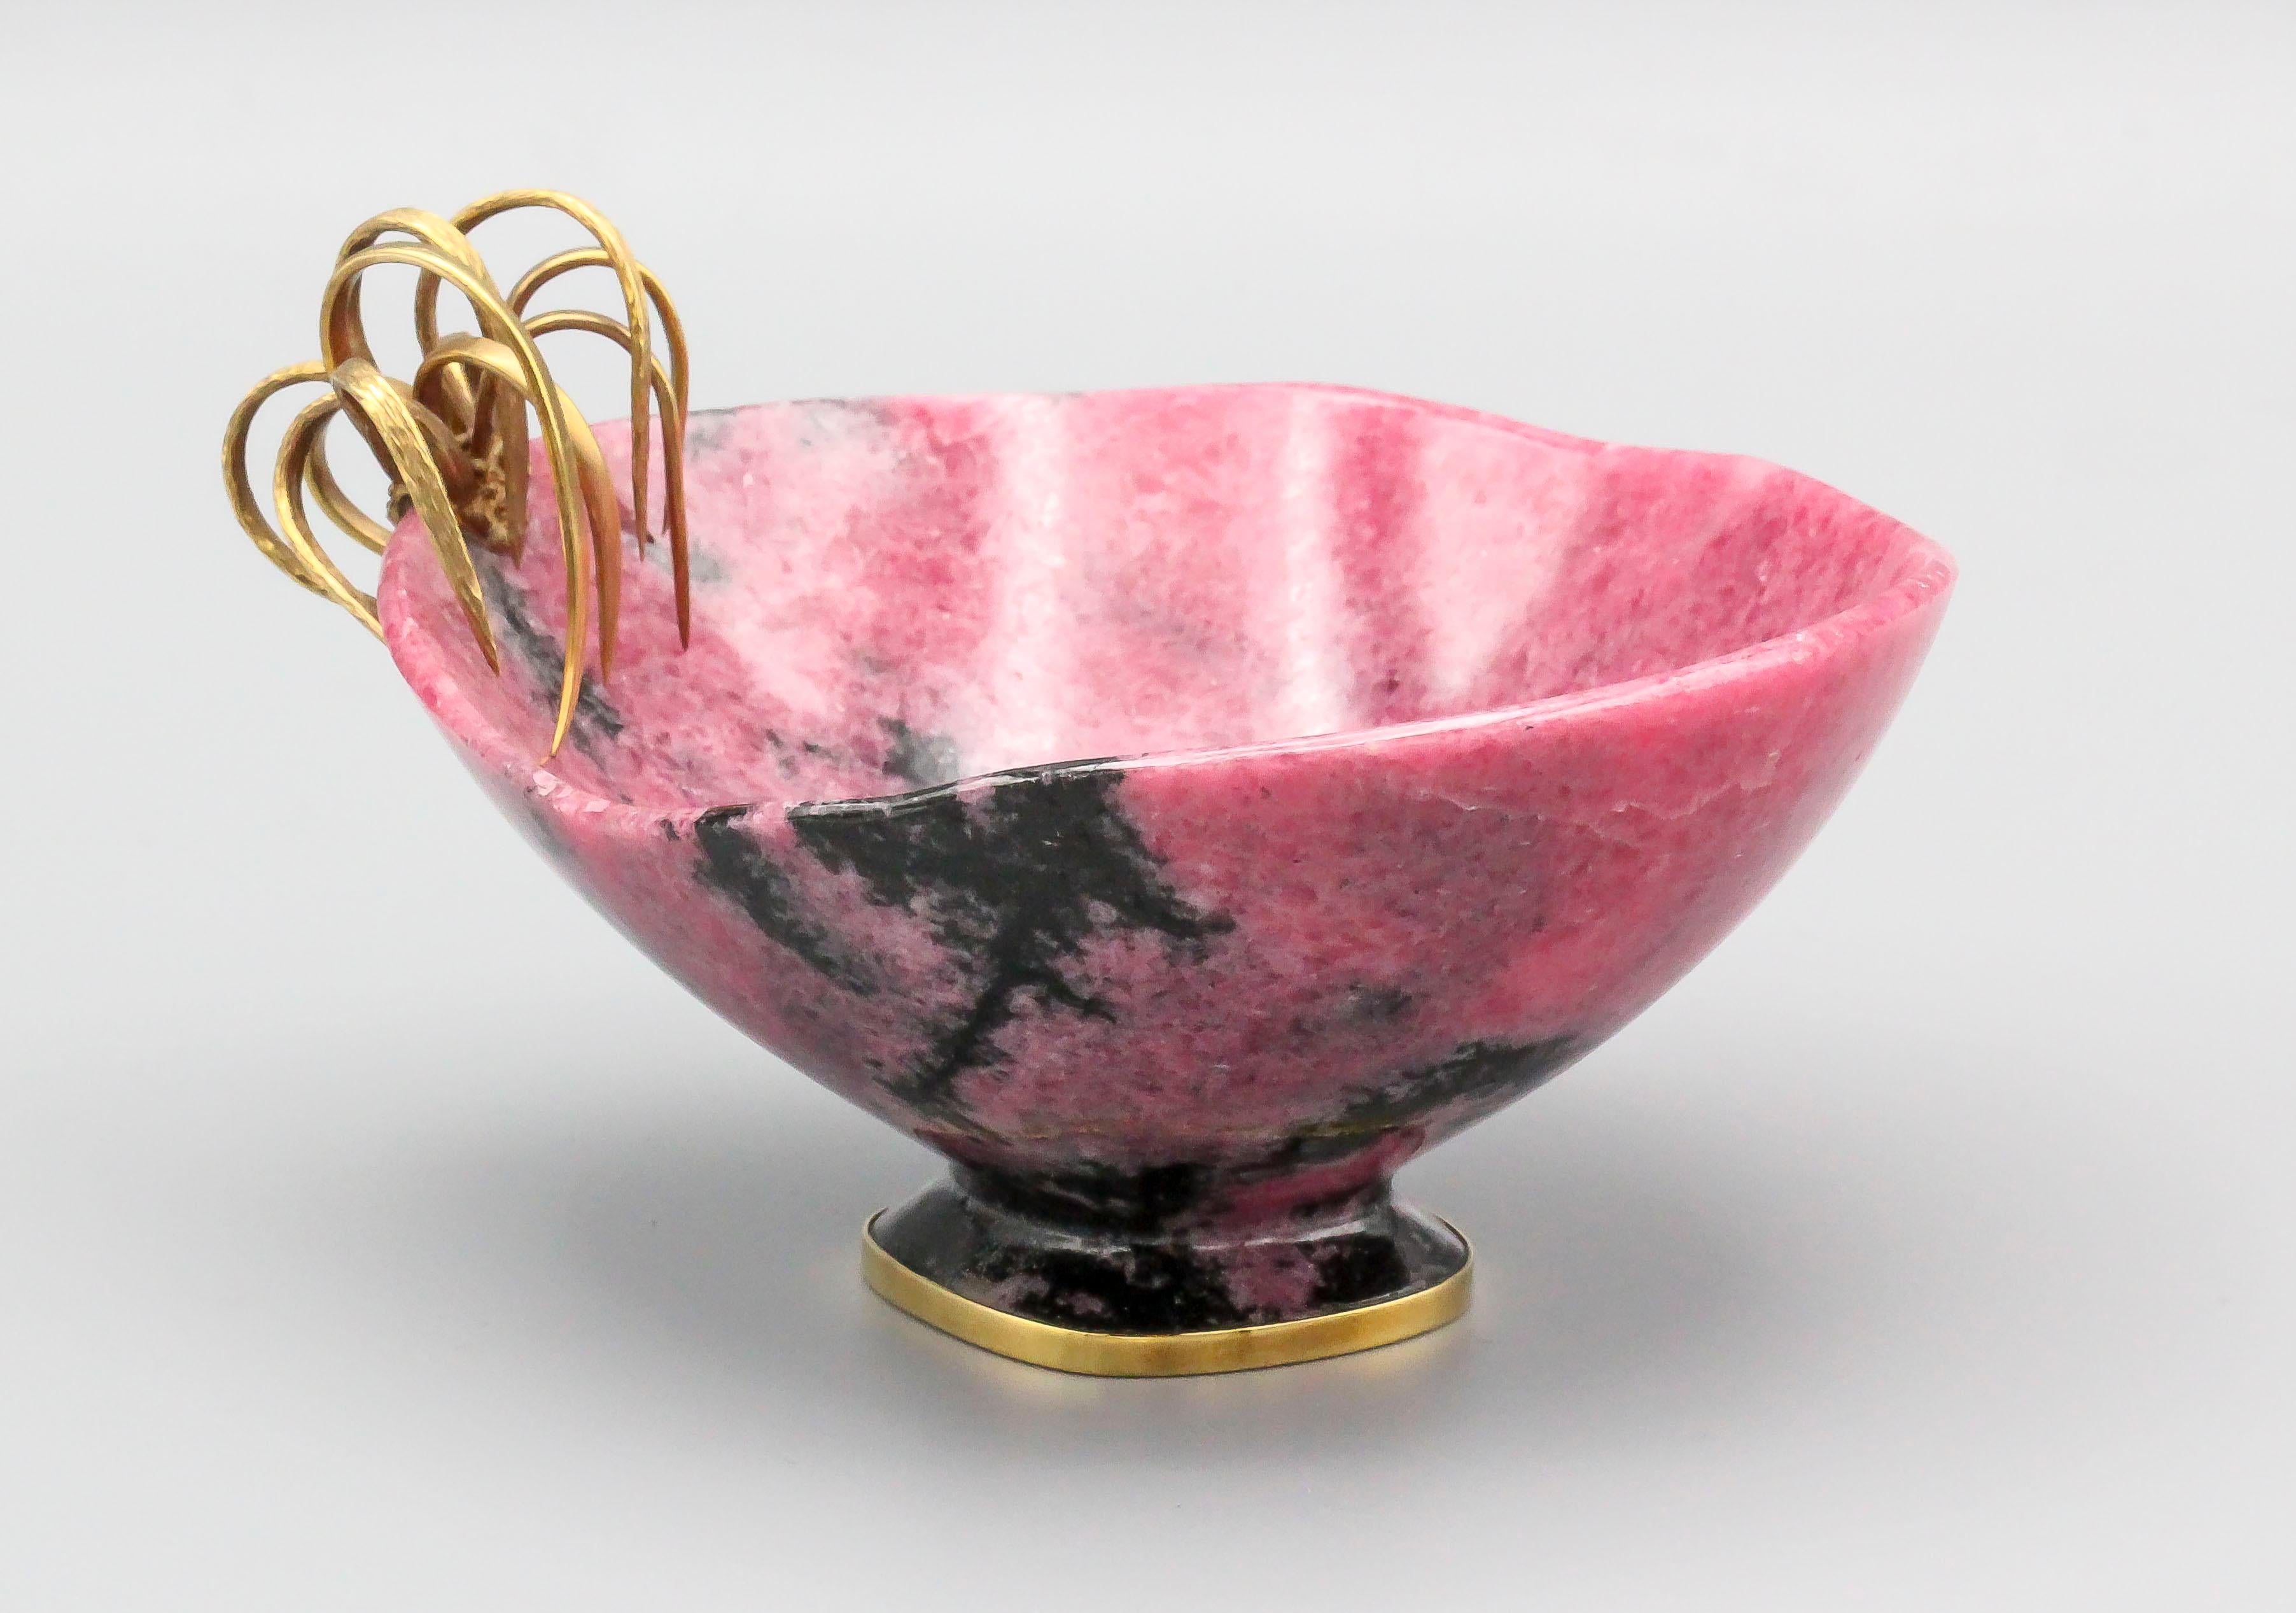 Elegant and refined 18k yellow gold bowl by Vacheron Constantin. Made in carved rhodochrosite; it further features a wide, soft rectangular base with gold outer ring, along with gold accents at the top of the bowl on one side.

Hallmarks: Vacheron